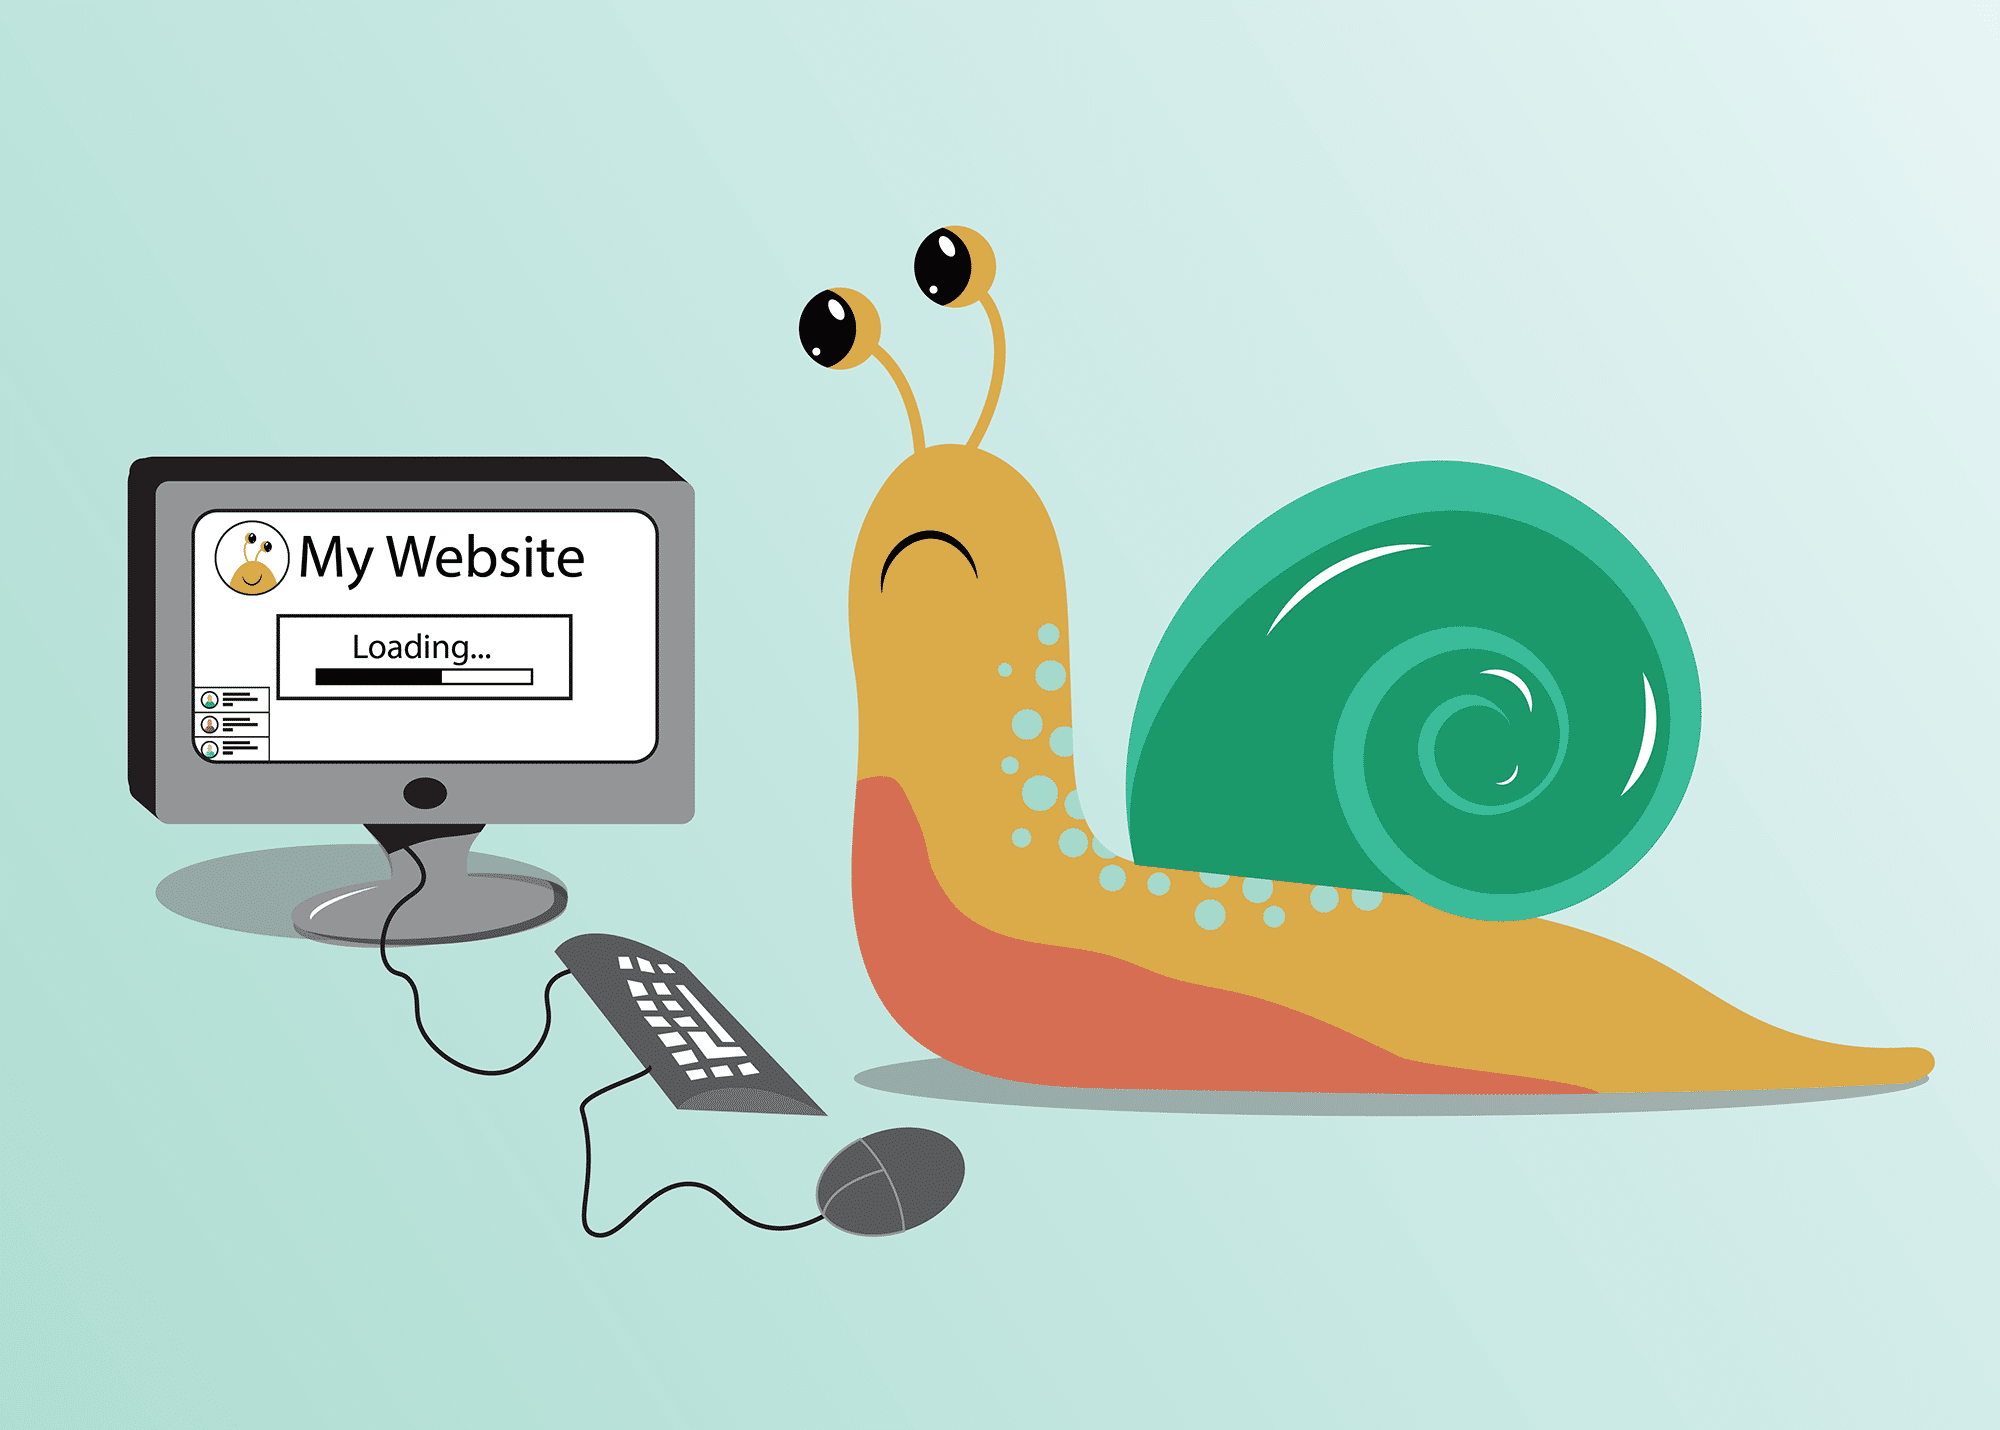 How To Fix Your Website Slow Issues?